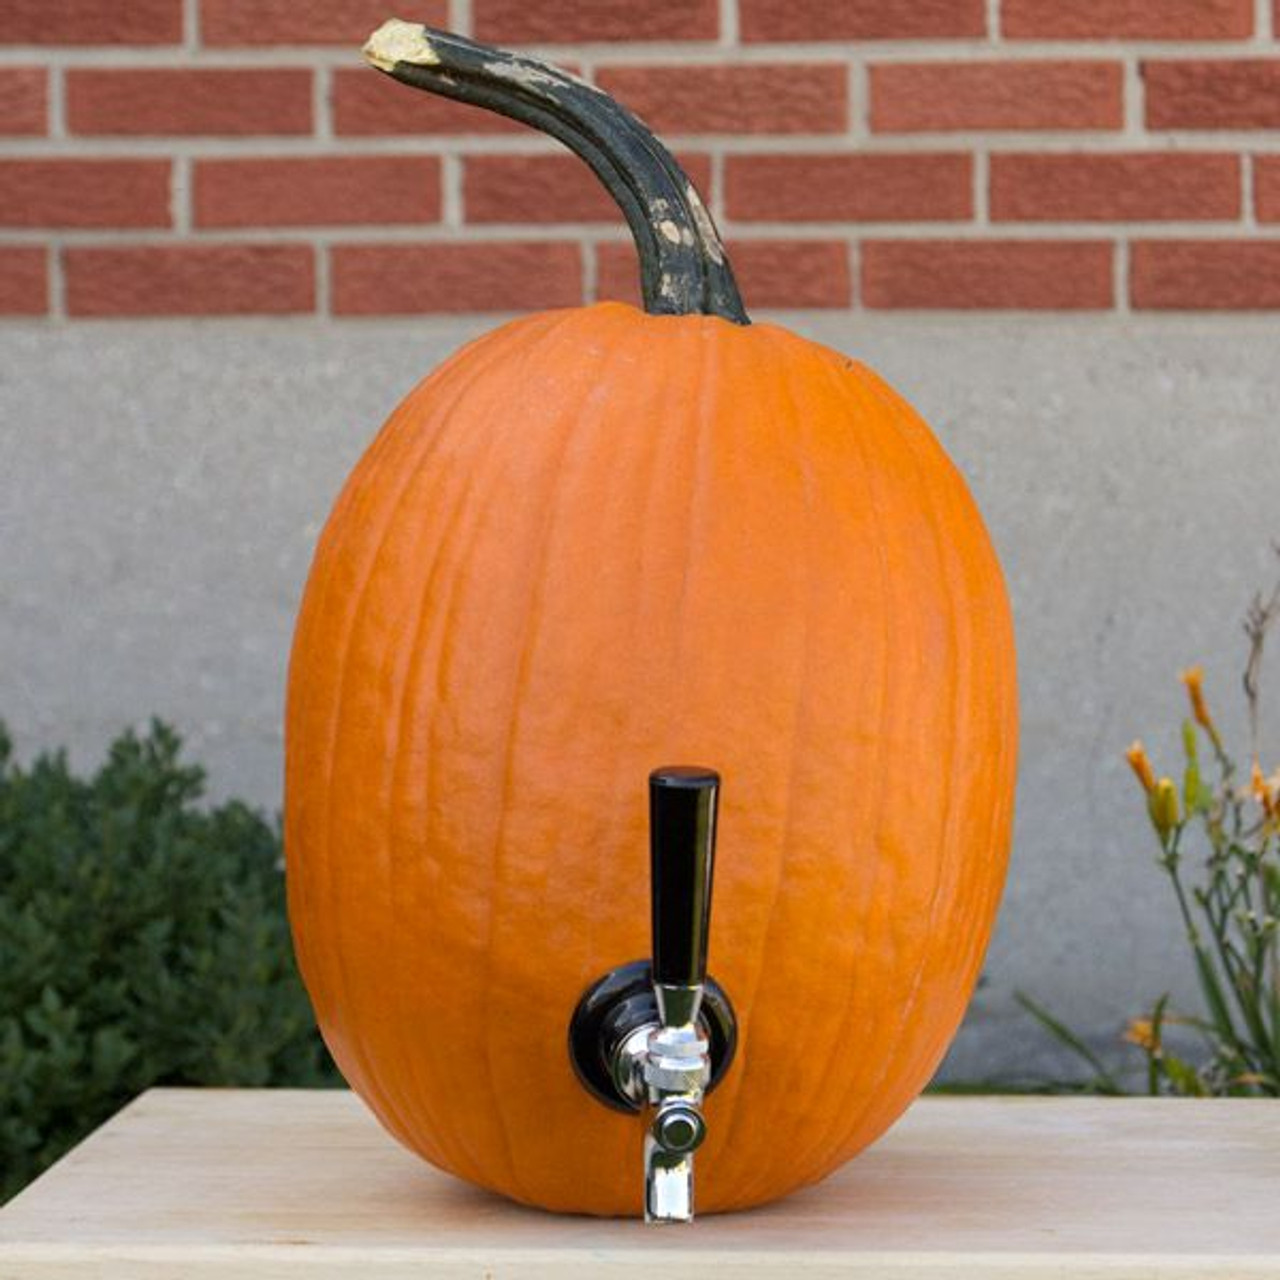 Party On Tap Pumpkin Tapping Kit Thanksgiving Includes Paper Straws Keg Spout for Halloween or Pumpkin Party Decorations 